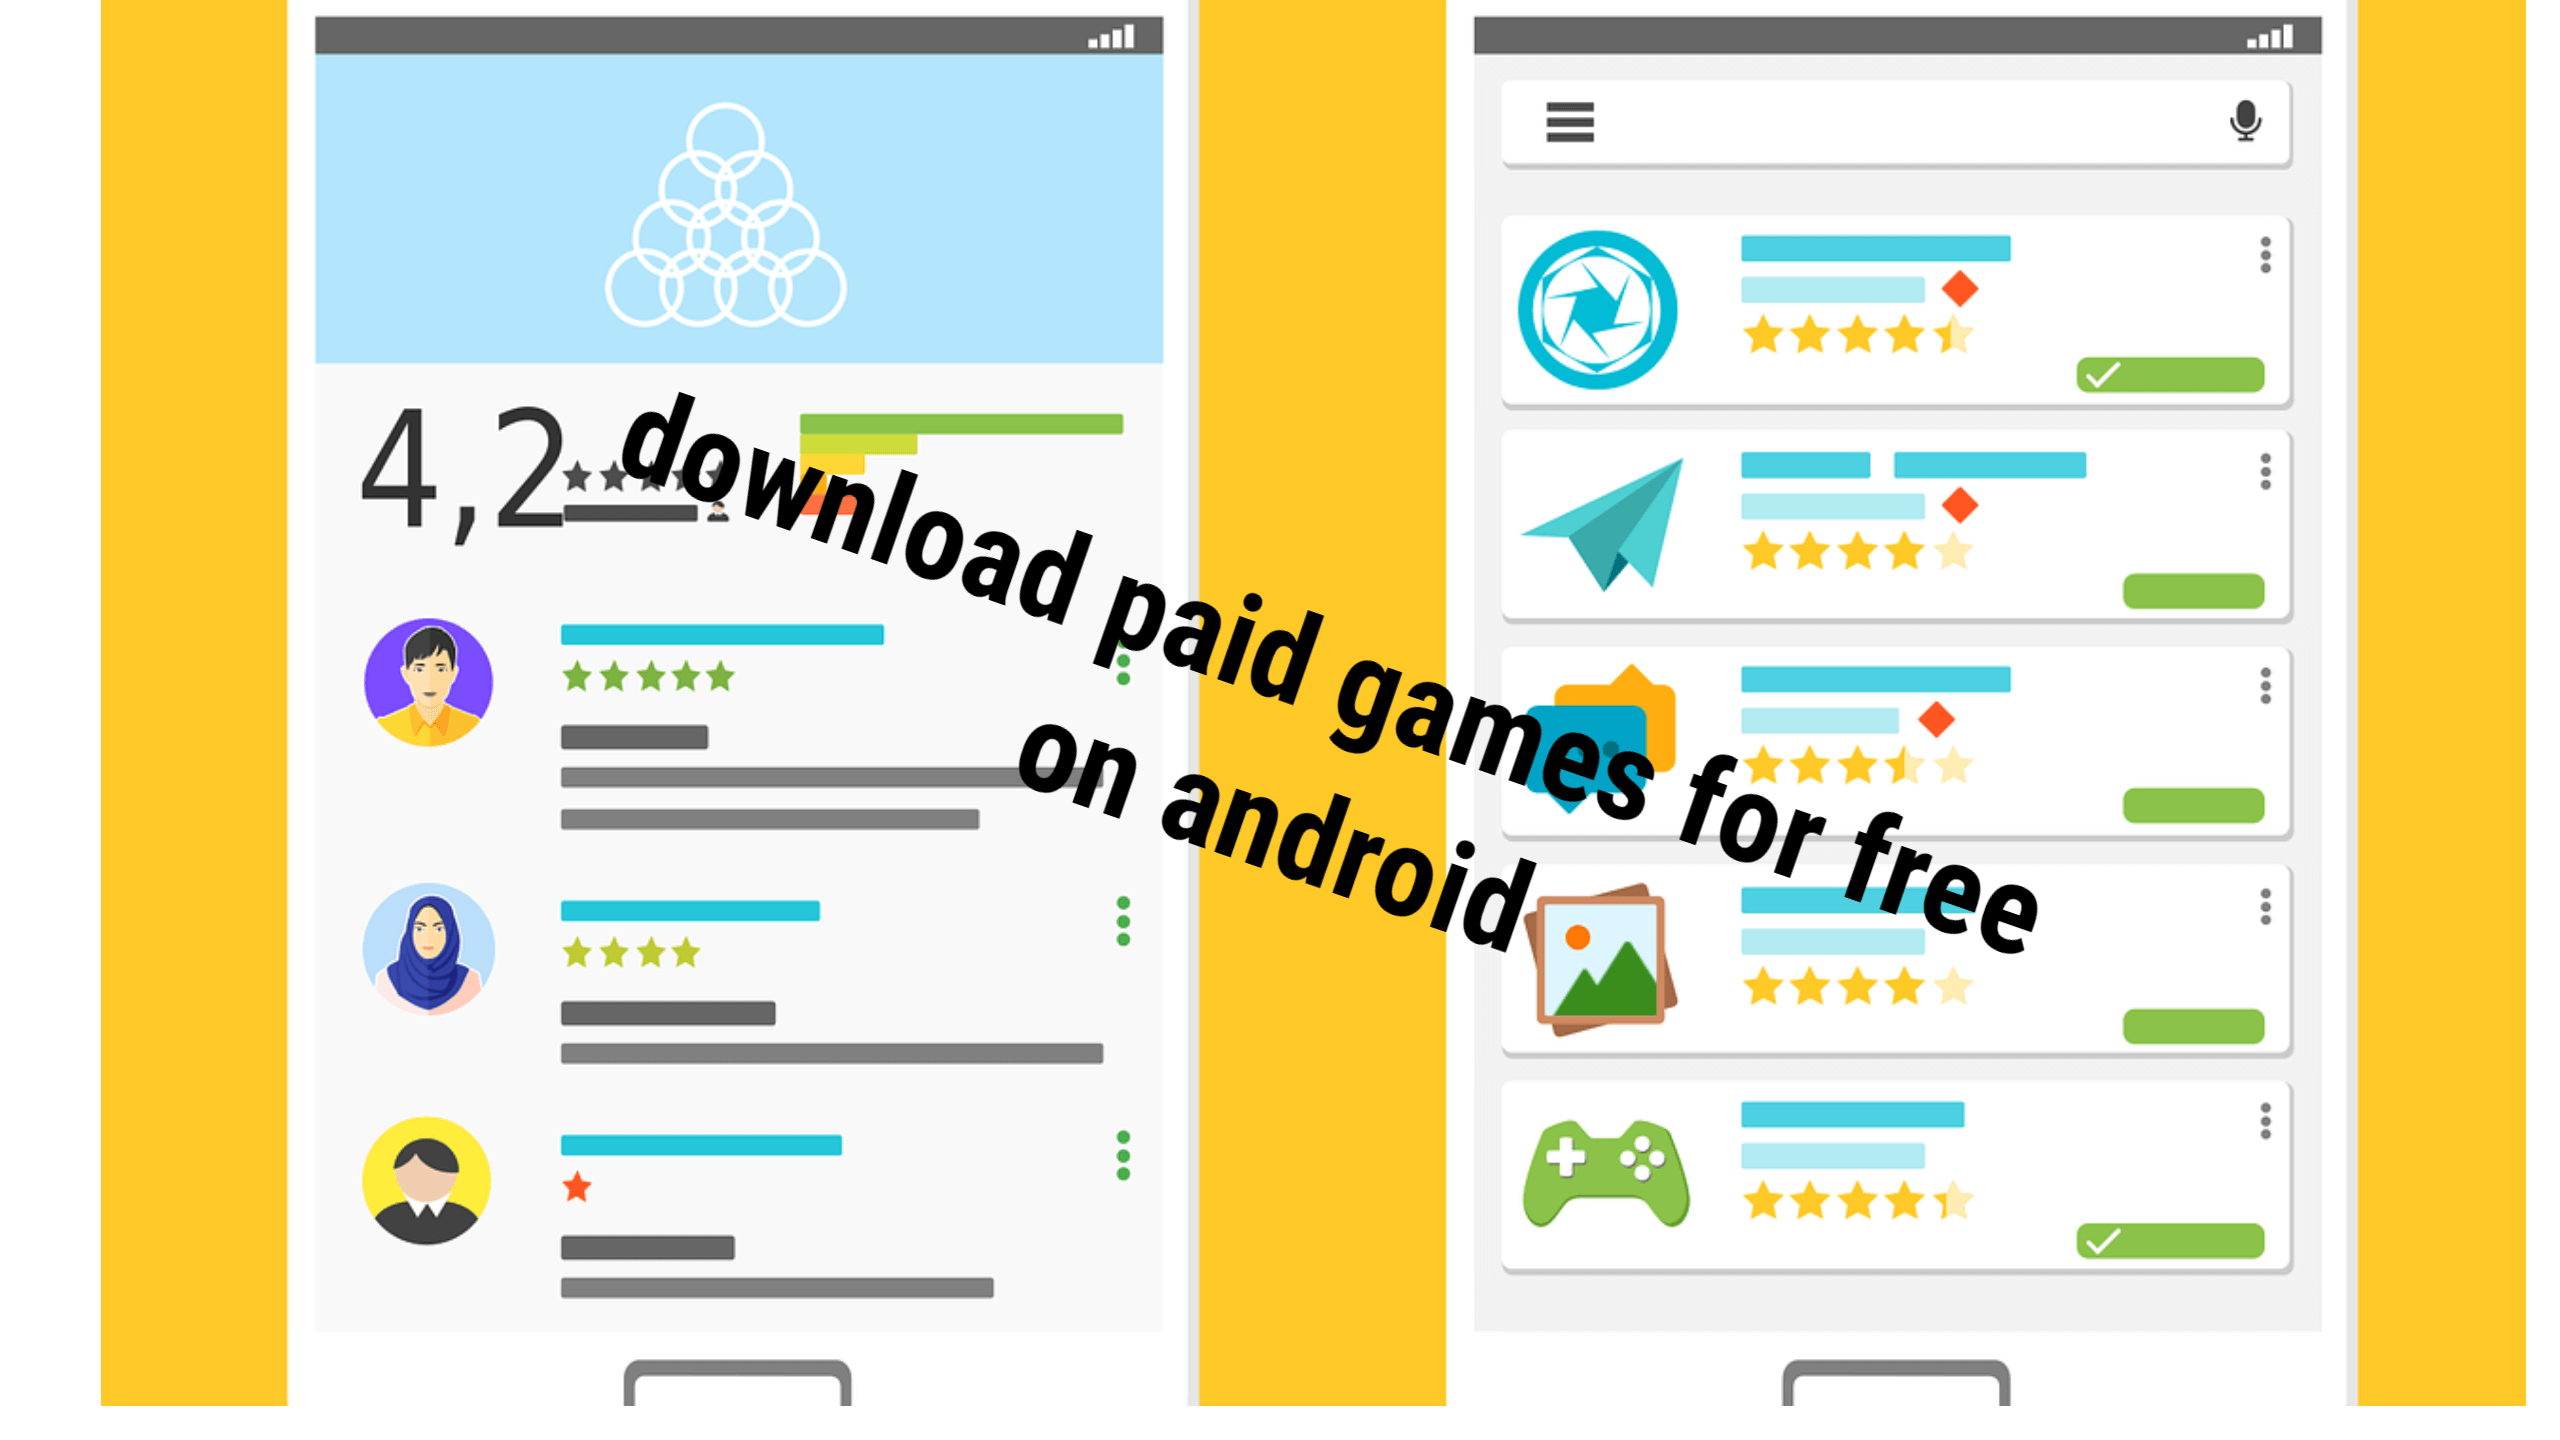 How to download paid games for free on android phones